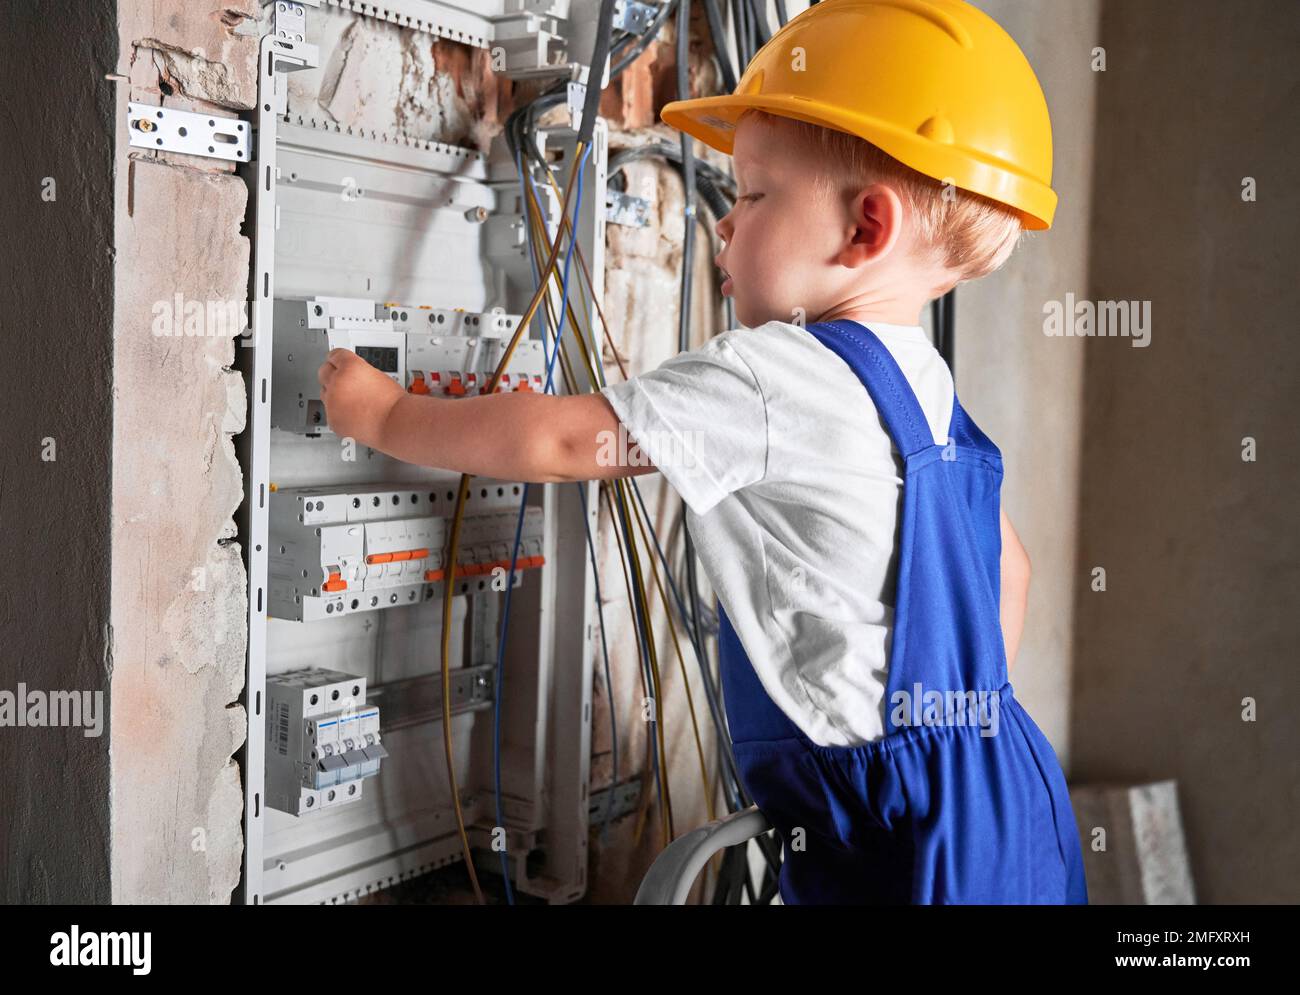 Side view of child in safety helmet fixing electrical switchboard or distribution board in apartment under renovation. Baby electrician repairing household electrical panel with automatic fuses. Stock Photo